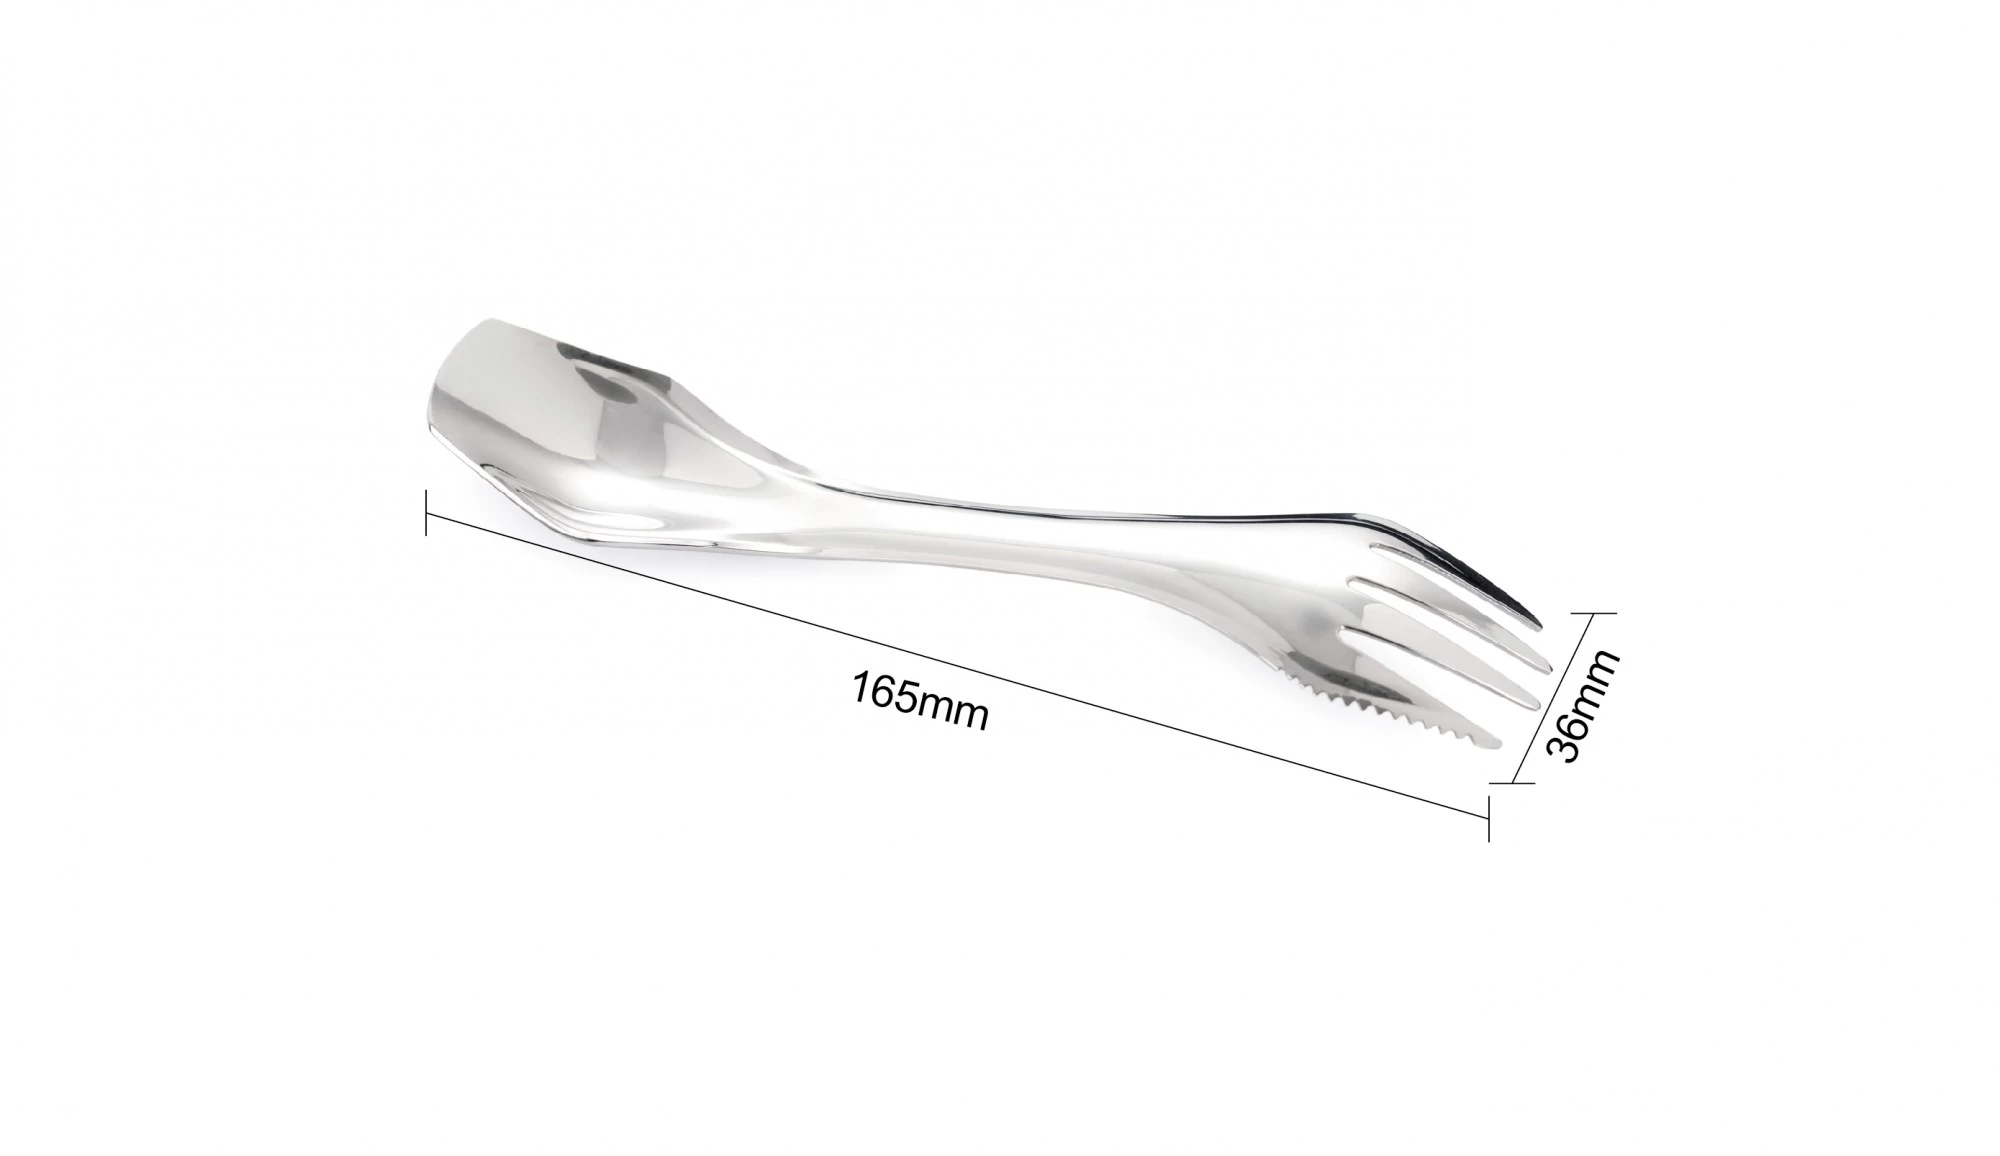 details of Multi-functional 3-in-1 Design Stainless Steel Camping Cutlery